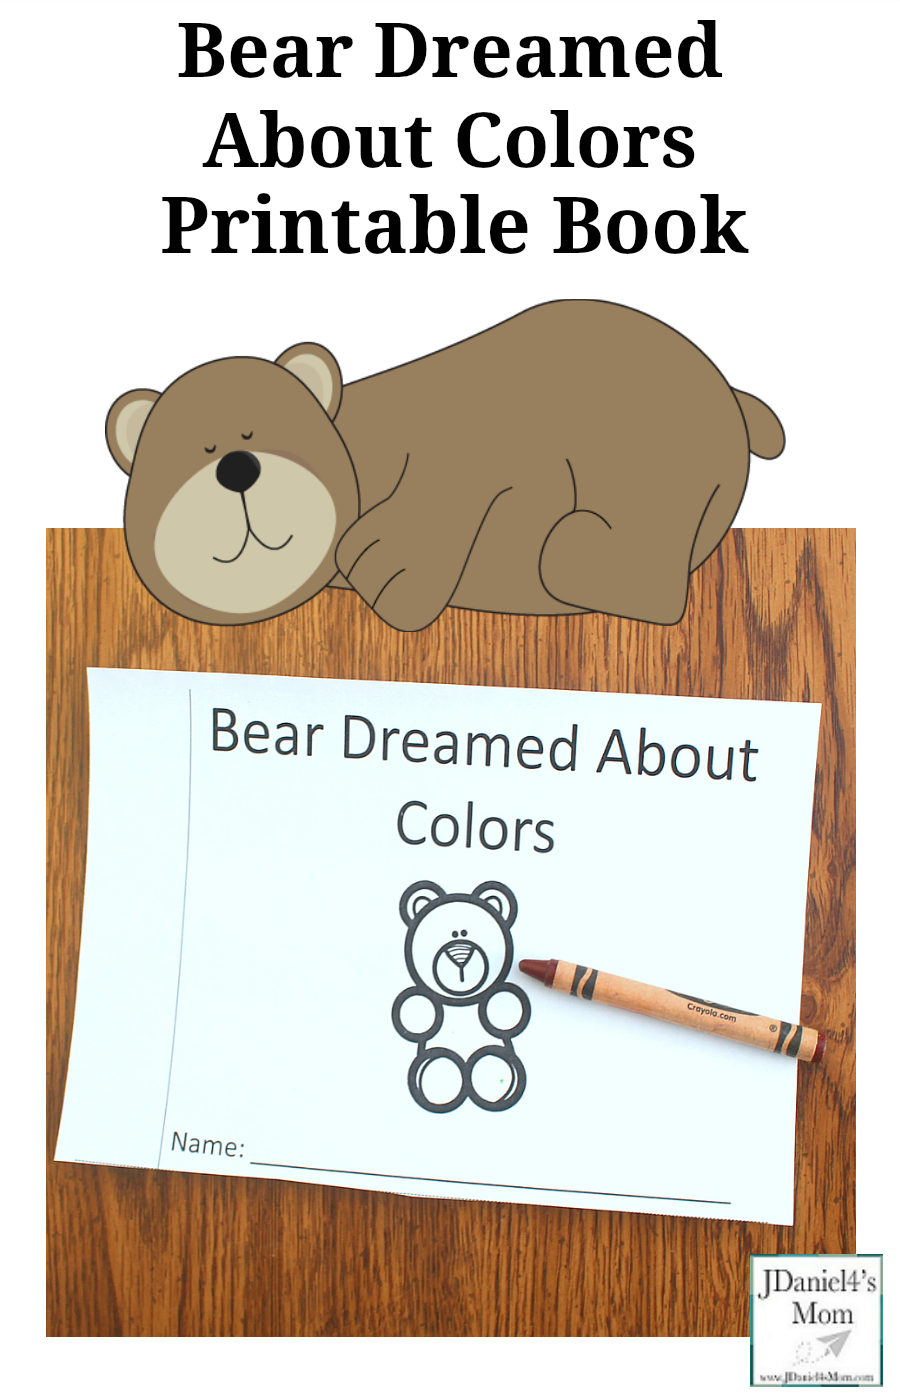 Bear Dream About Colors Printable Book This printable was created to explore after reading the